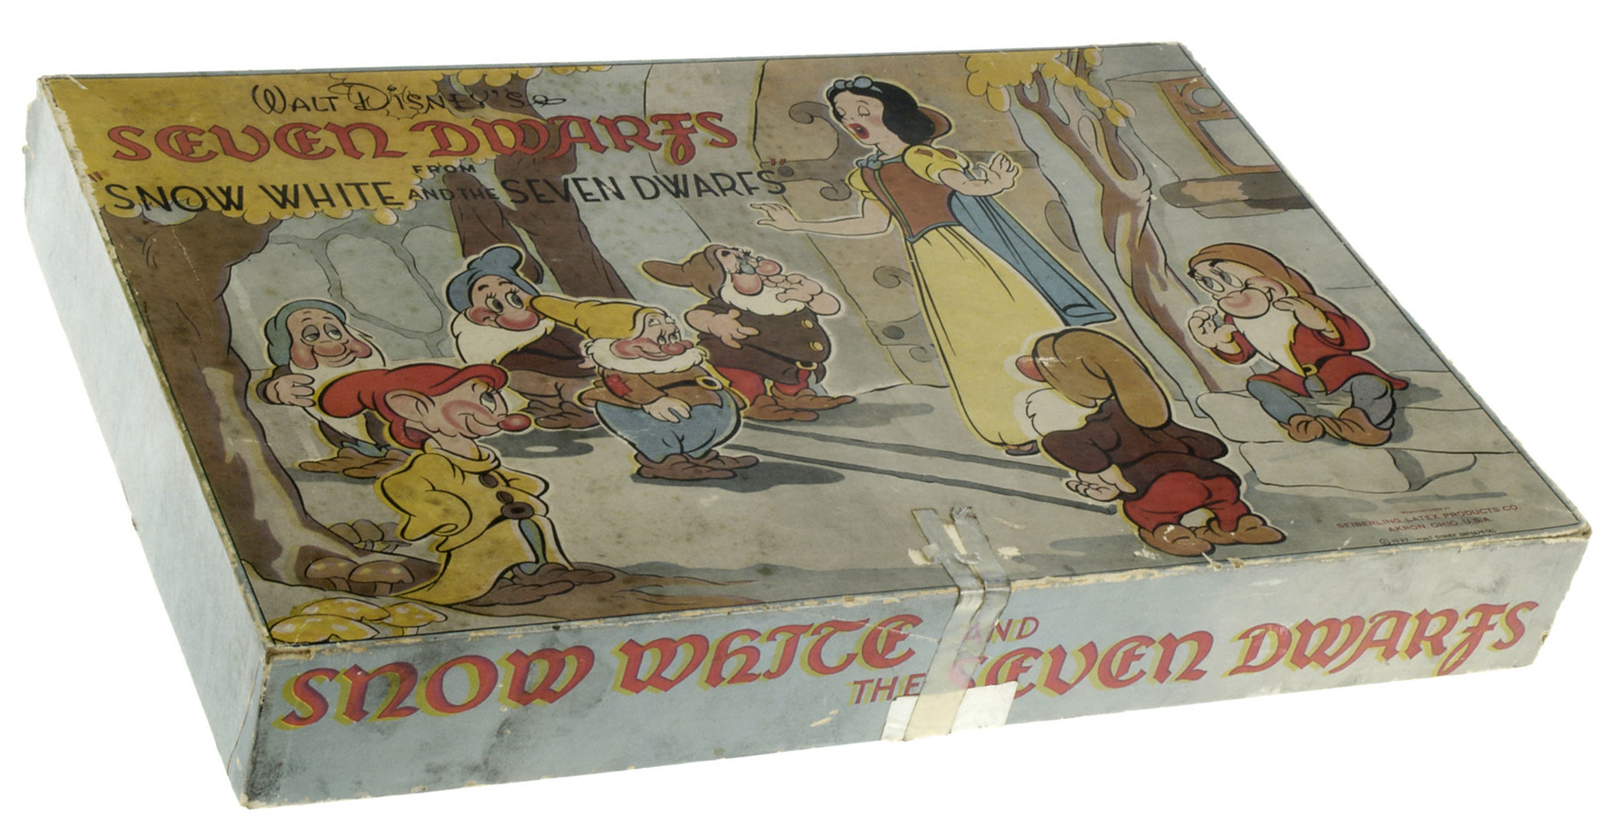 Filmic Light - Snow White Archive: Vintage Boxed Sets of Seiberling ...